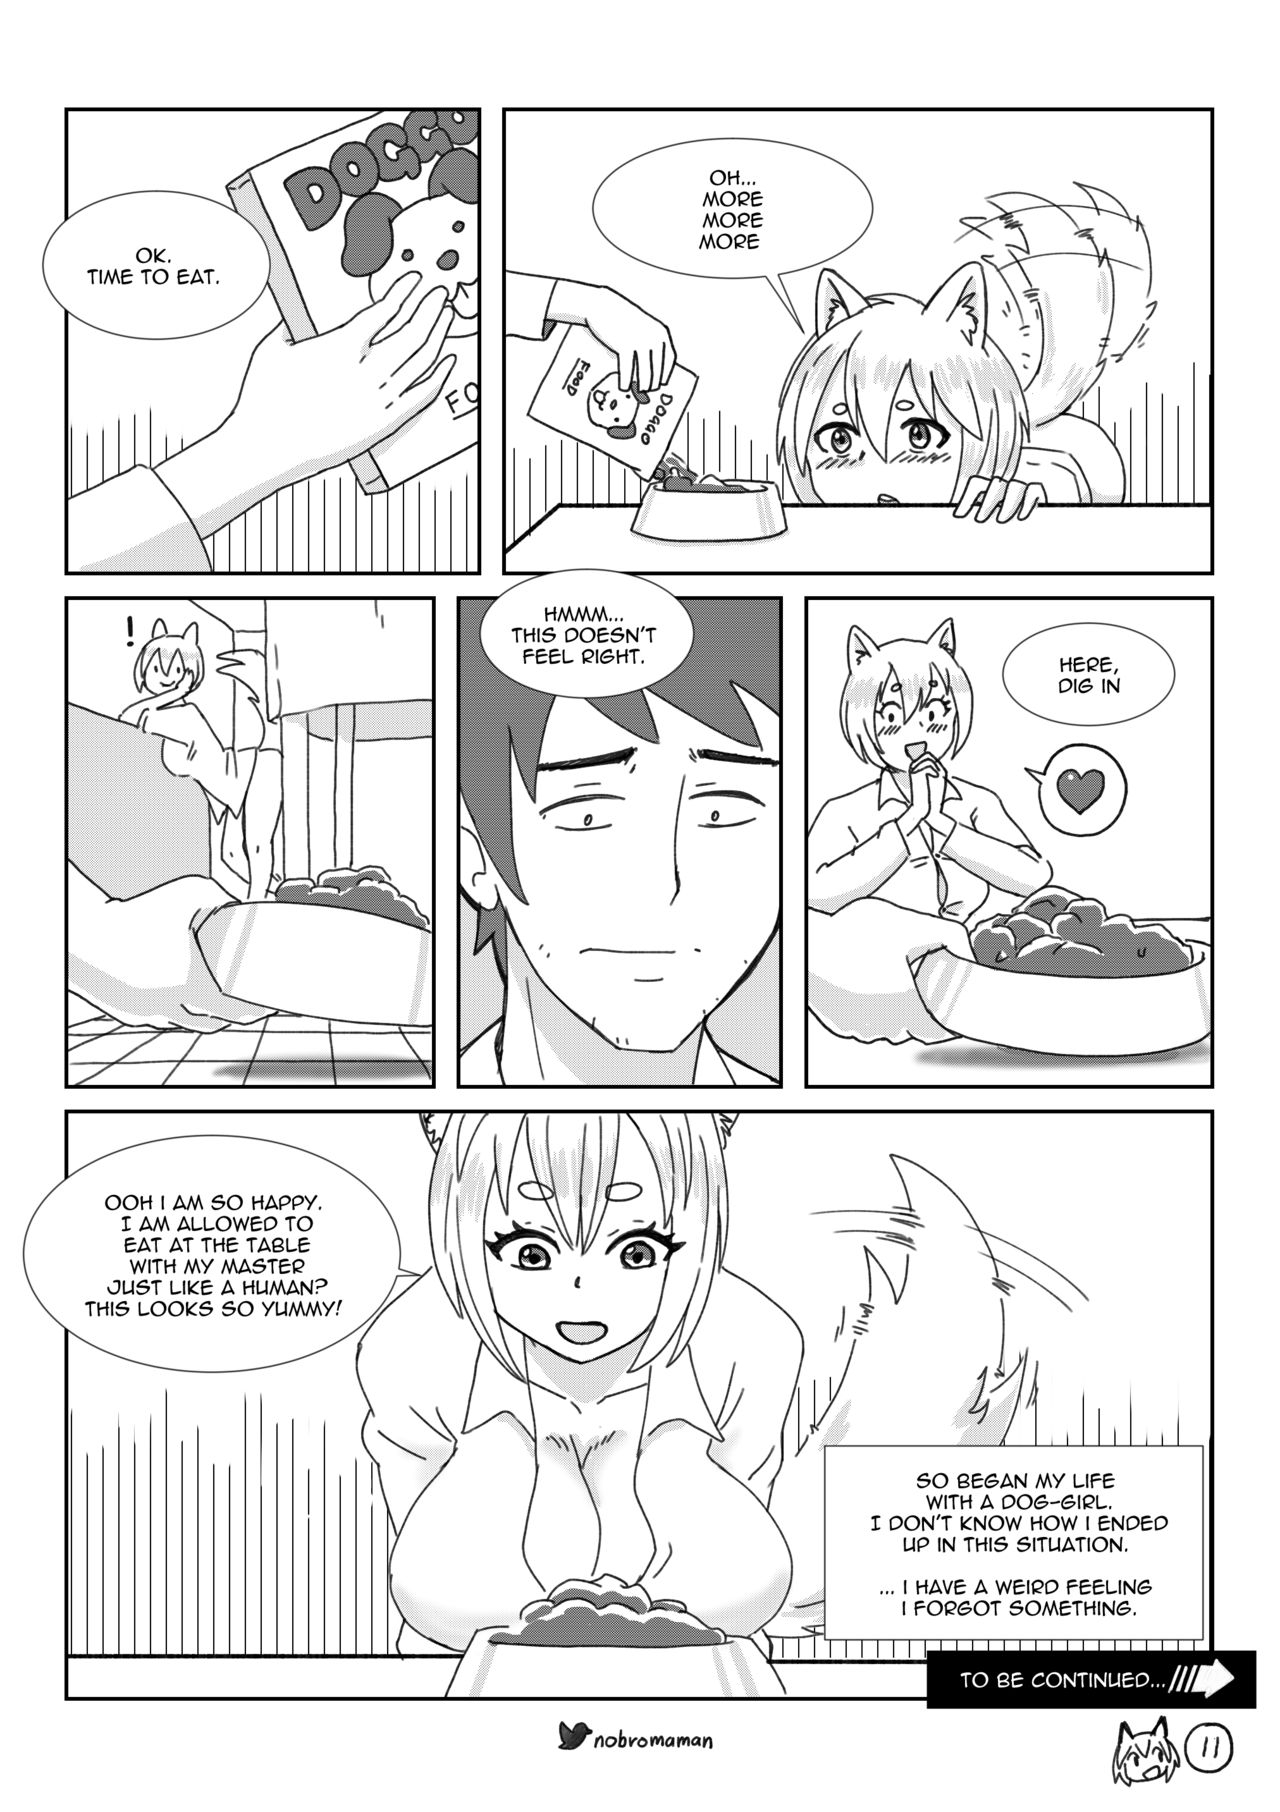 Life with a dog girl - Chapter1 (ongoing) 11